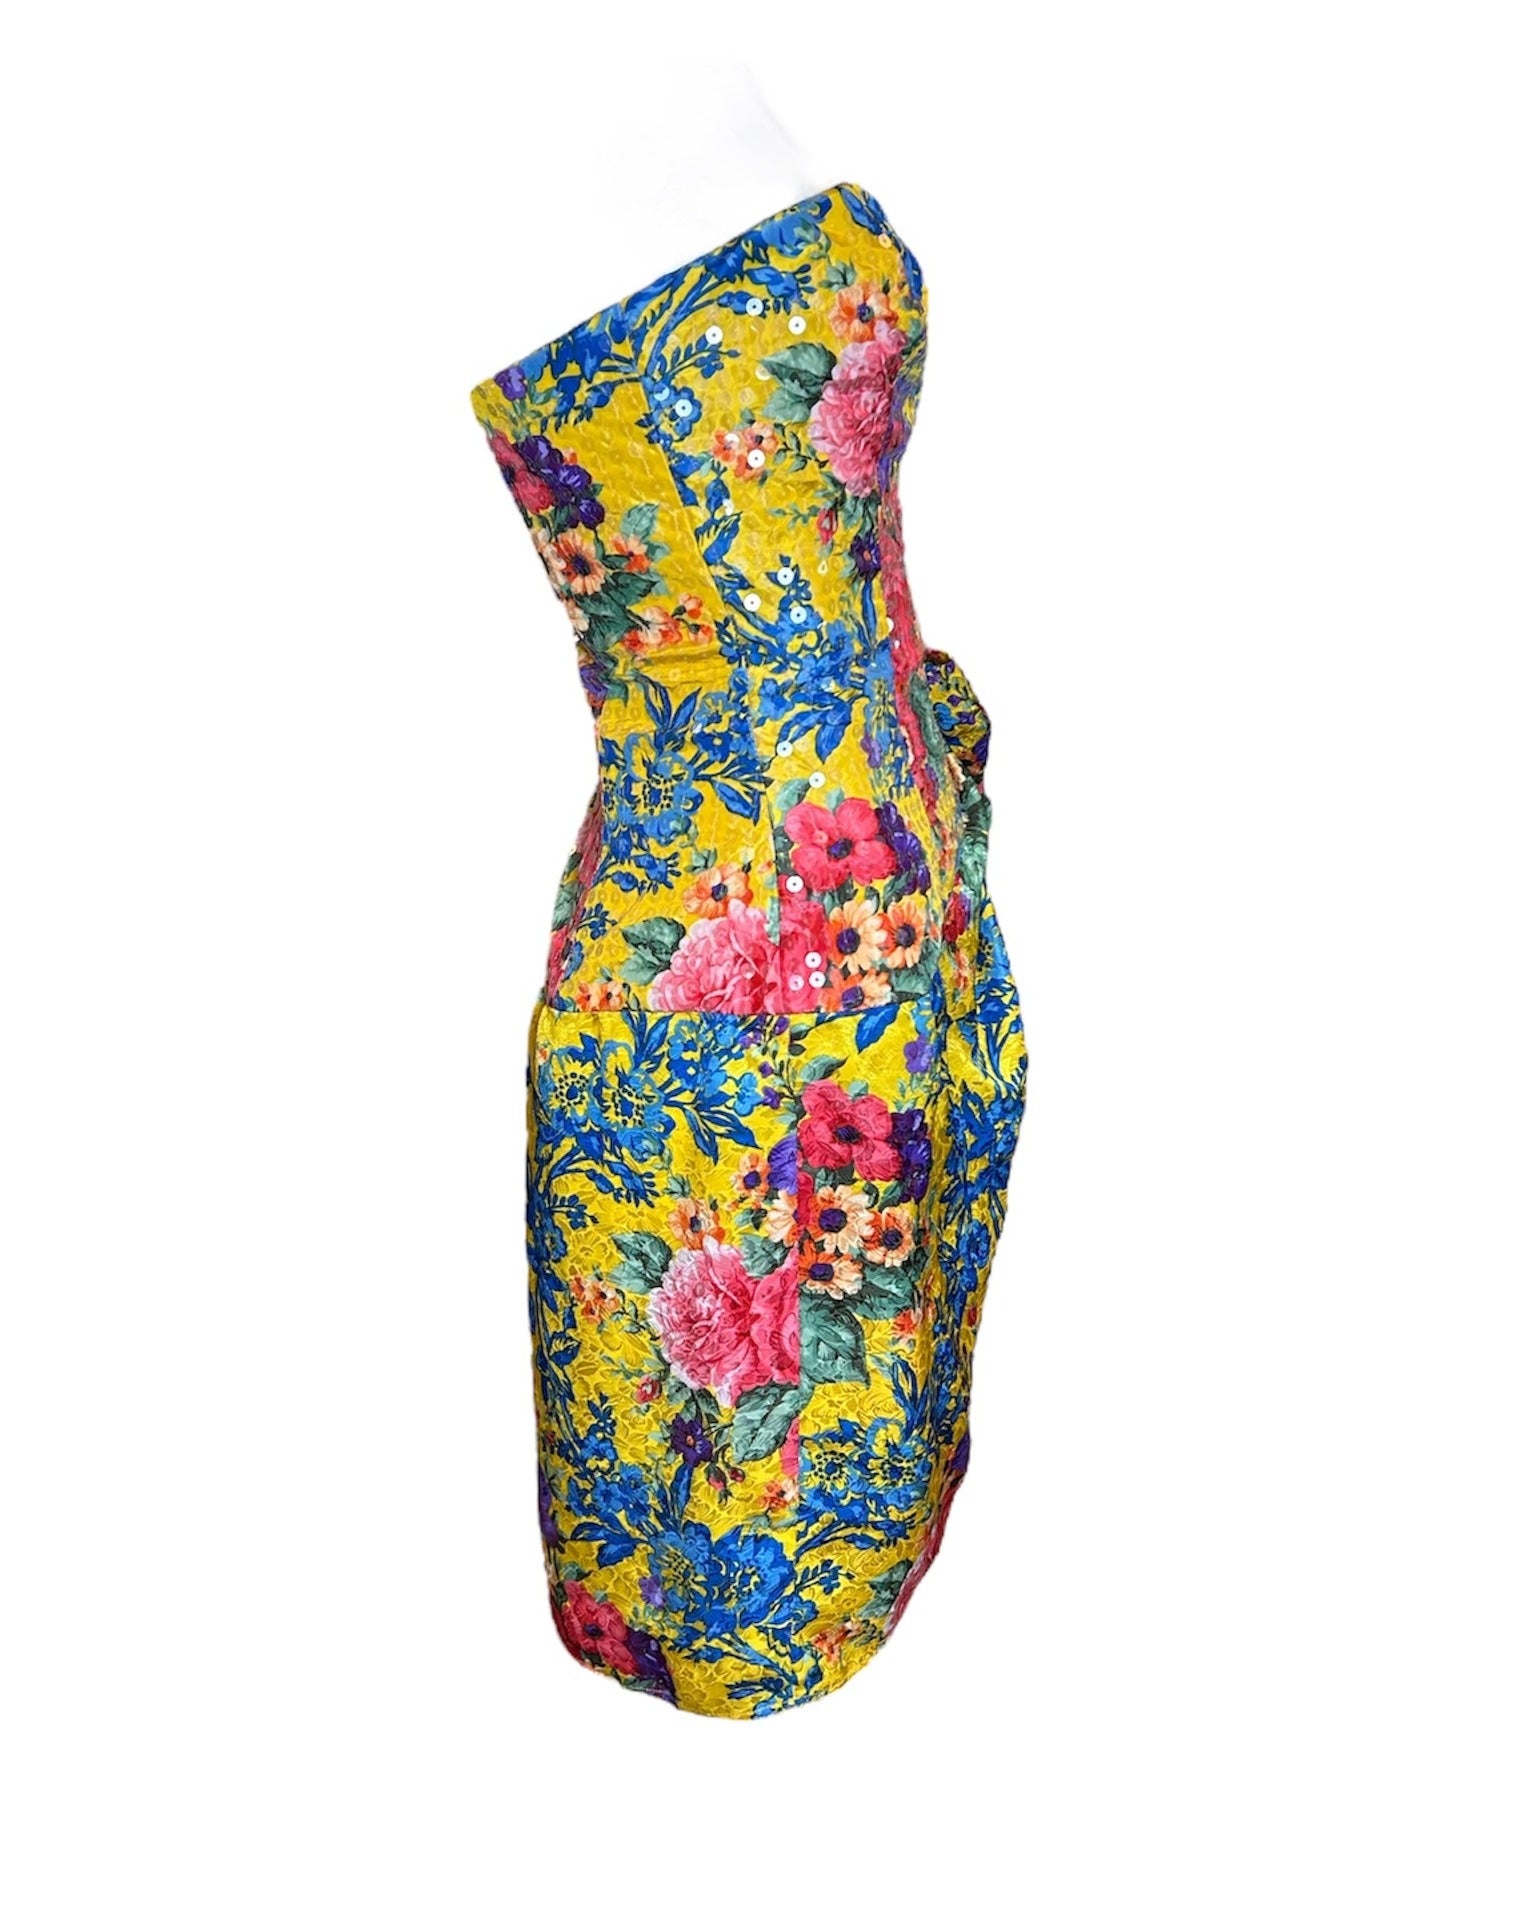  Bellville Sassoon Yellow Floral Silk & Sequined Cocktail Dress SIDE PHOTO 3 OF 6